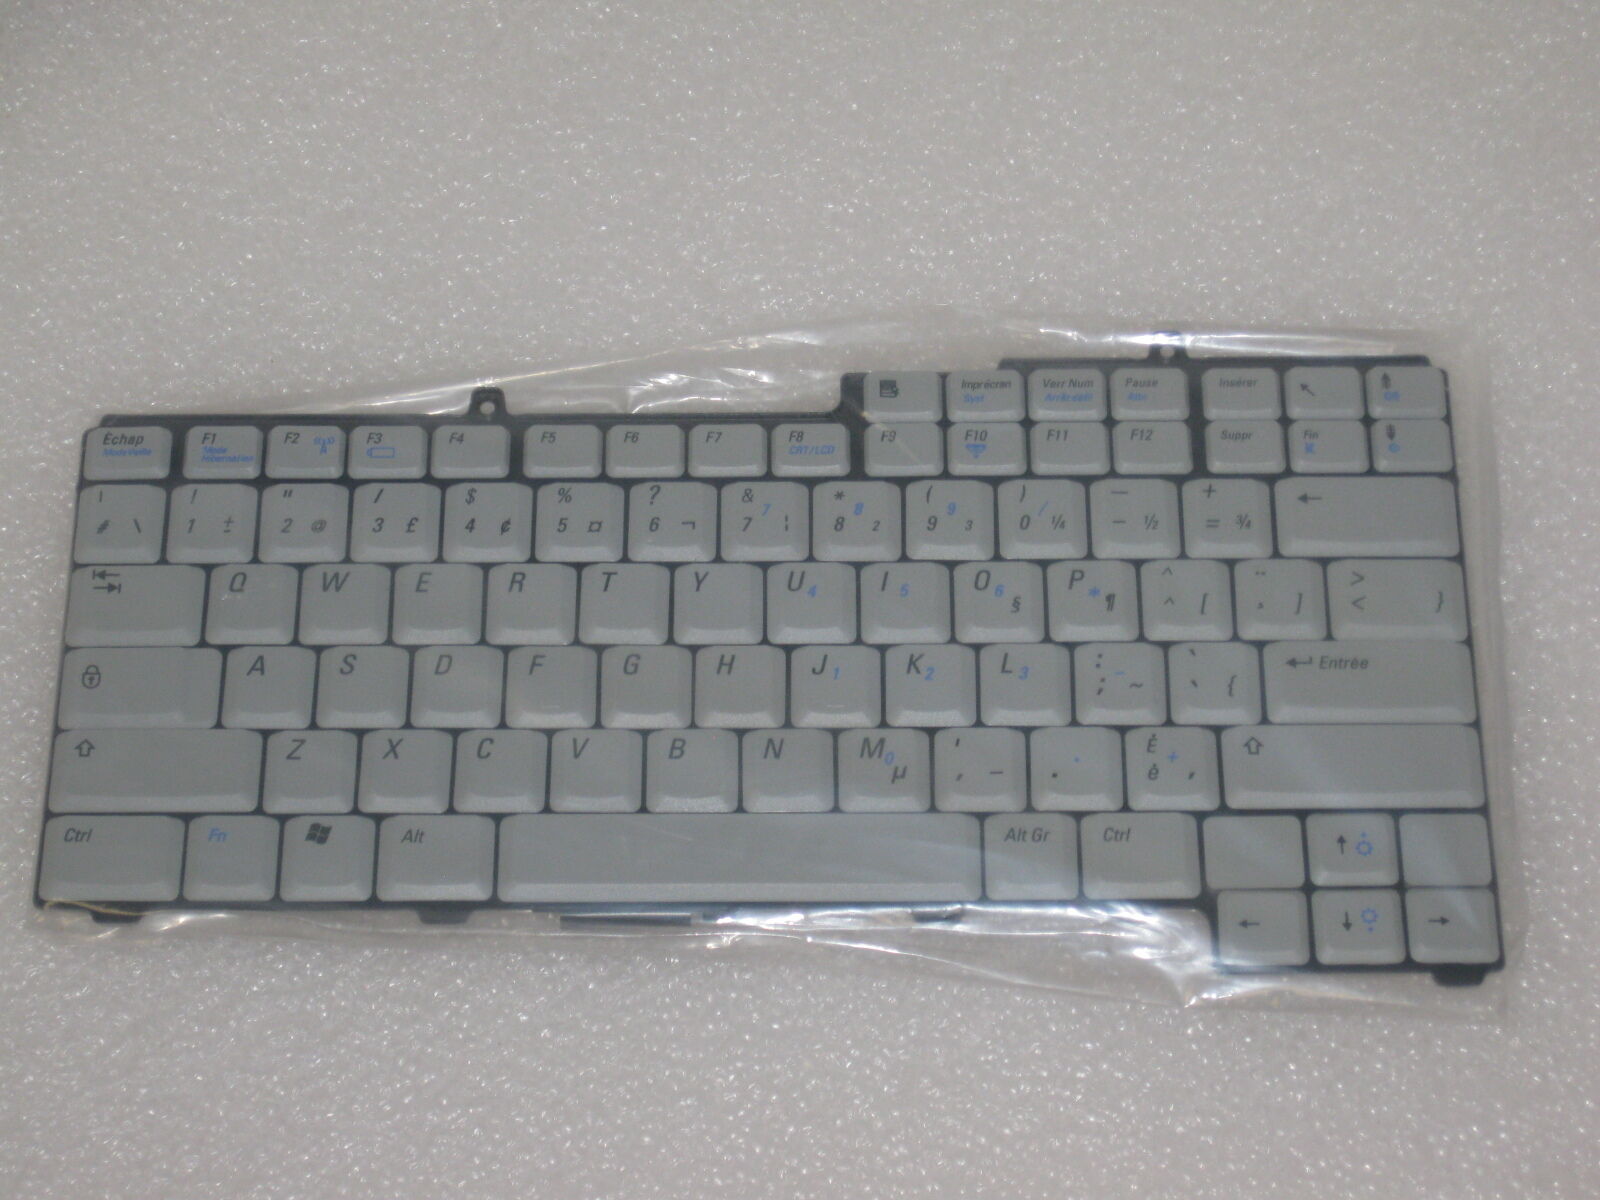  	  New Original Dell DH004 French Canadian Keyboard Inspiron XPS M1710